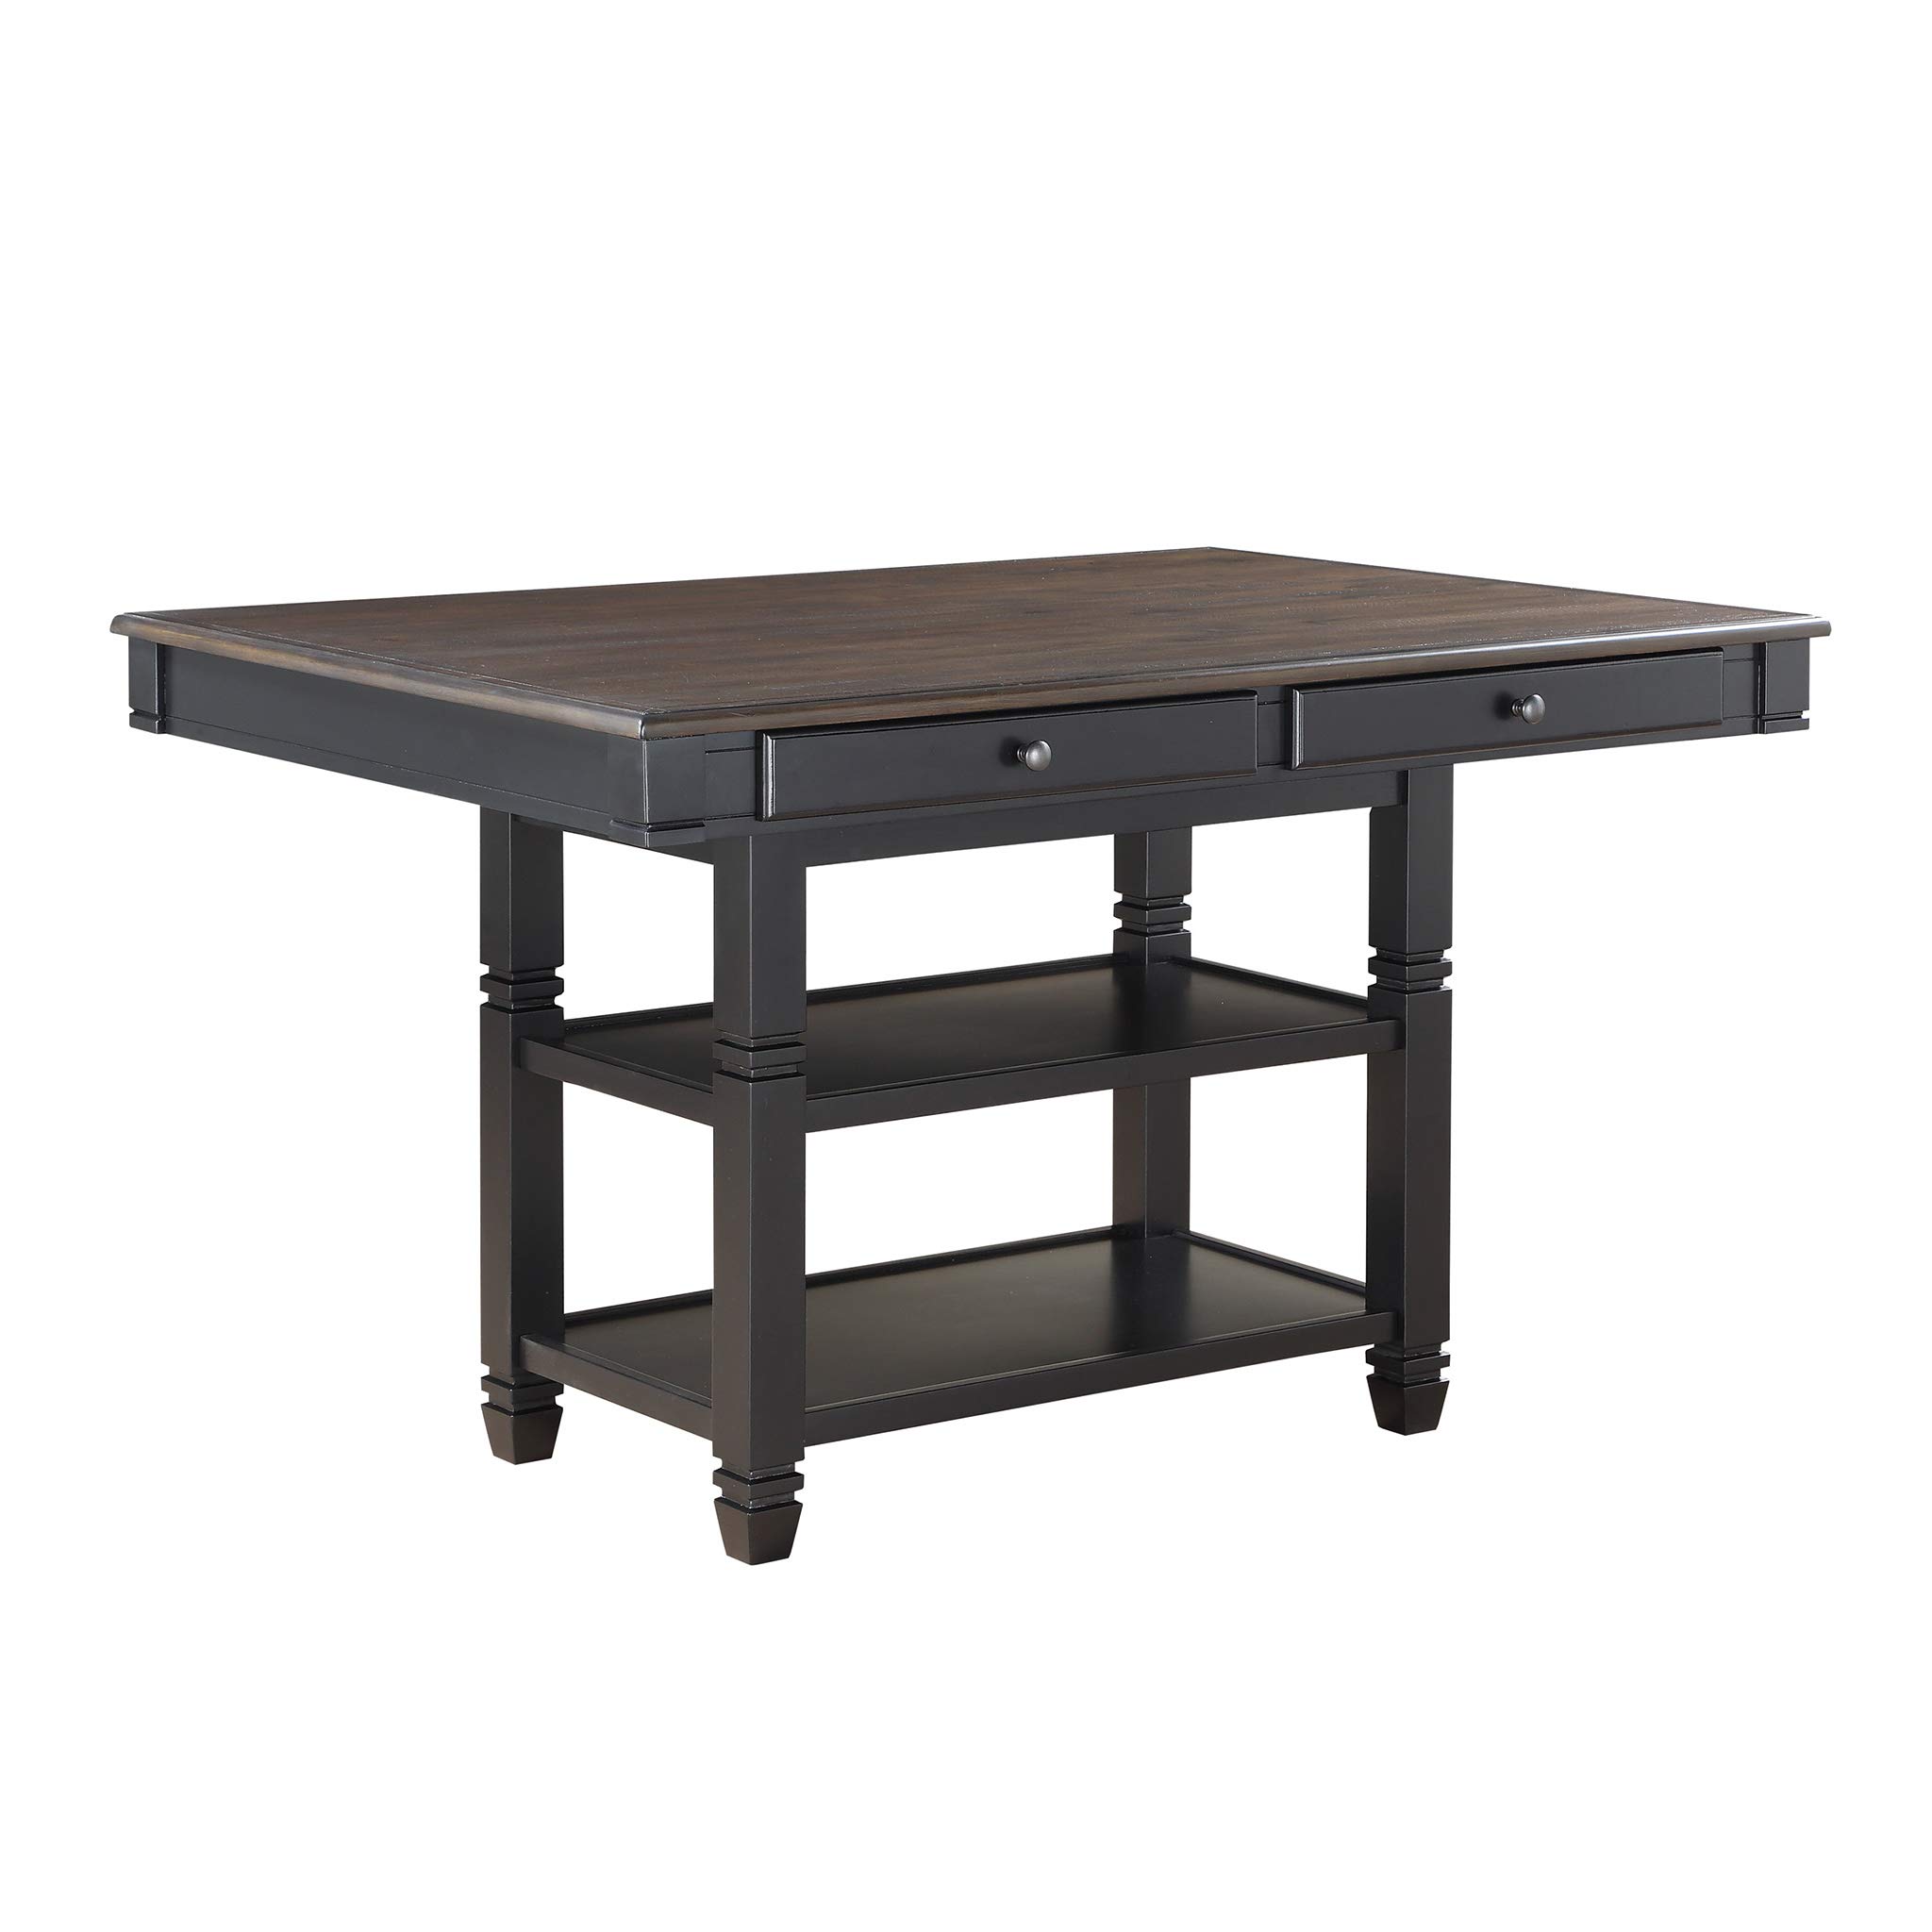 Homelegance 60 x 42 Two-Tone counter Height Dining Table, BlackNatural